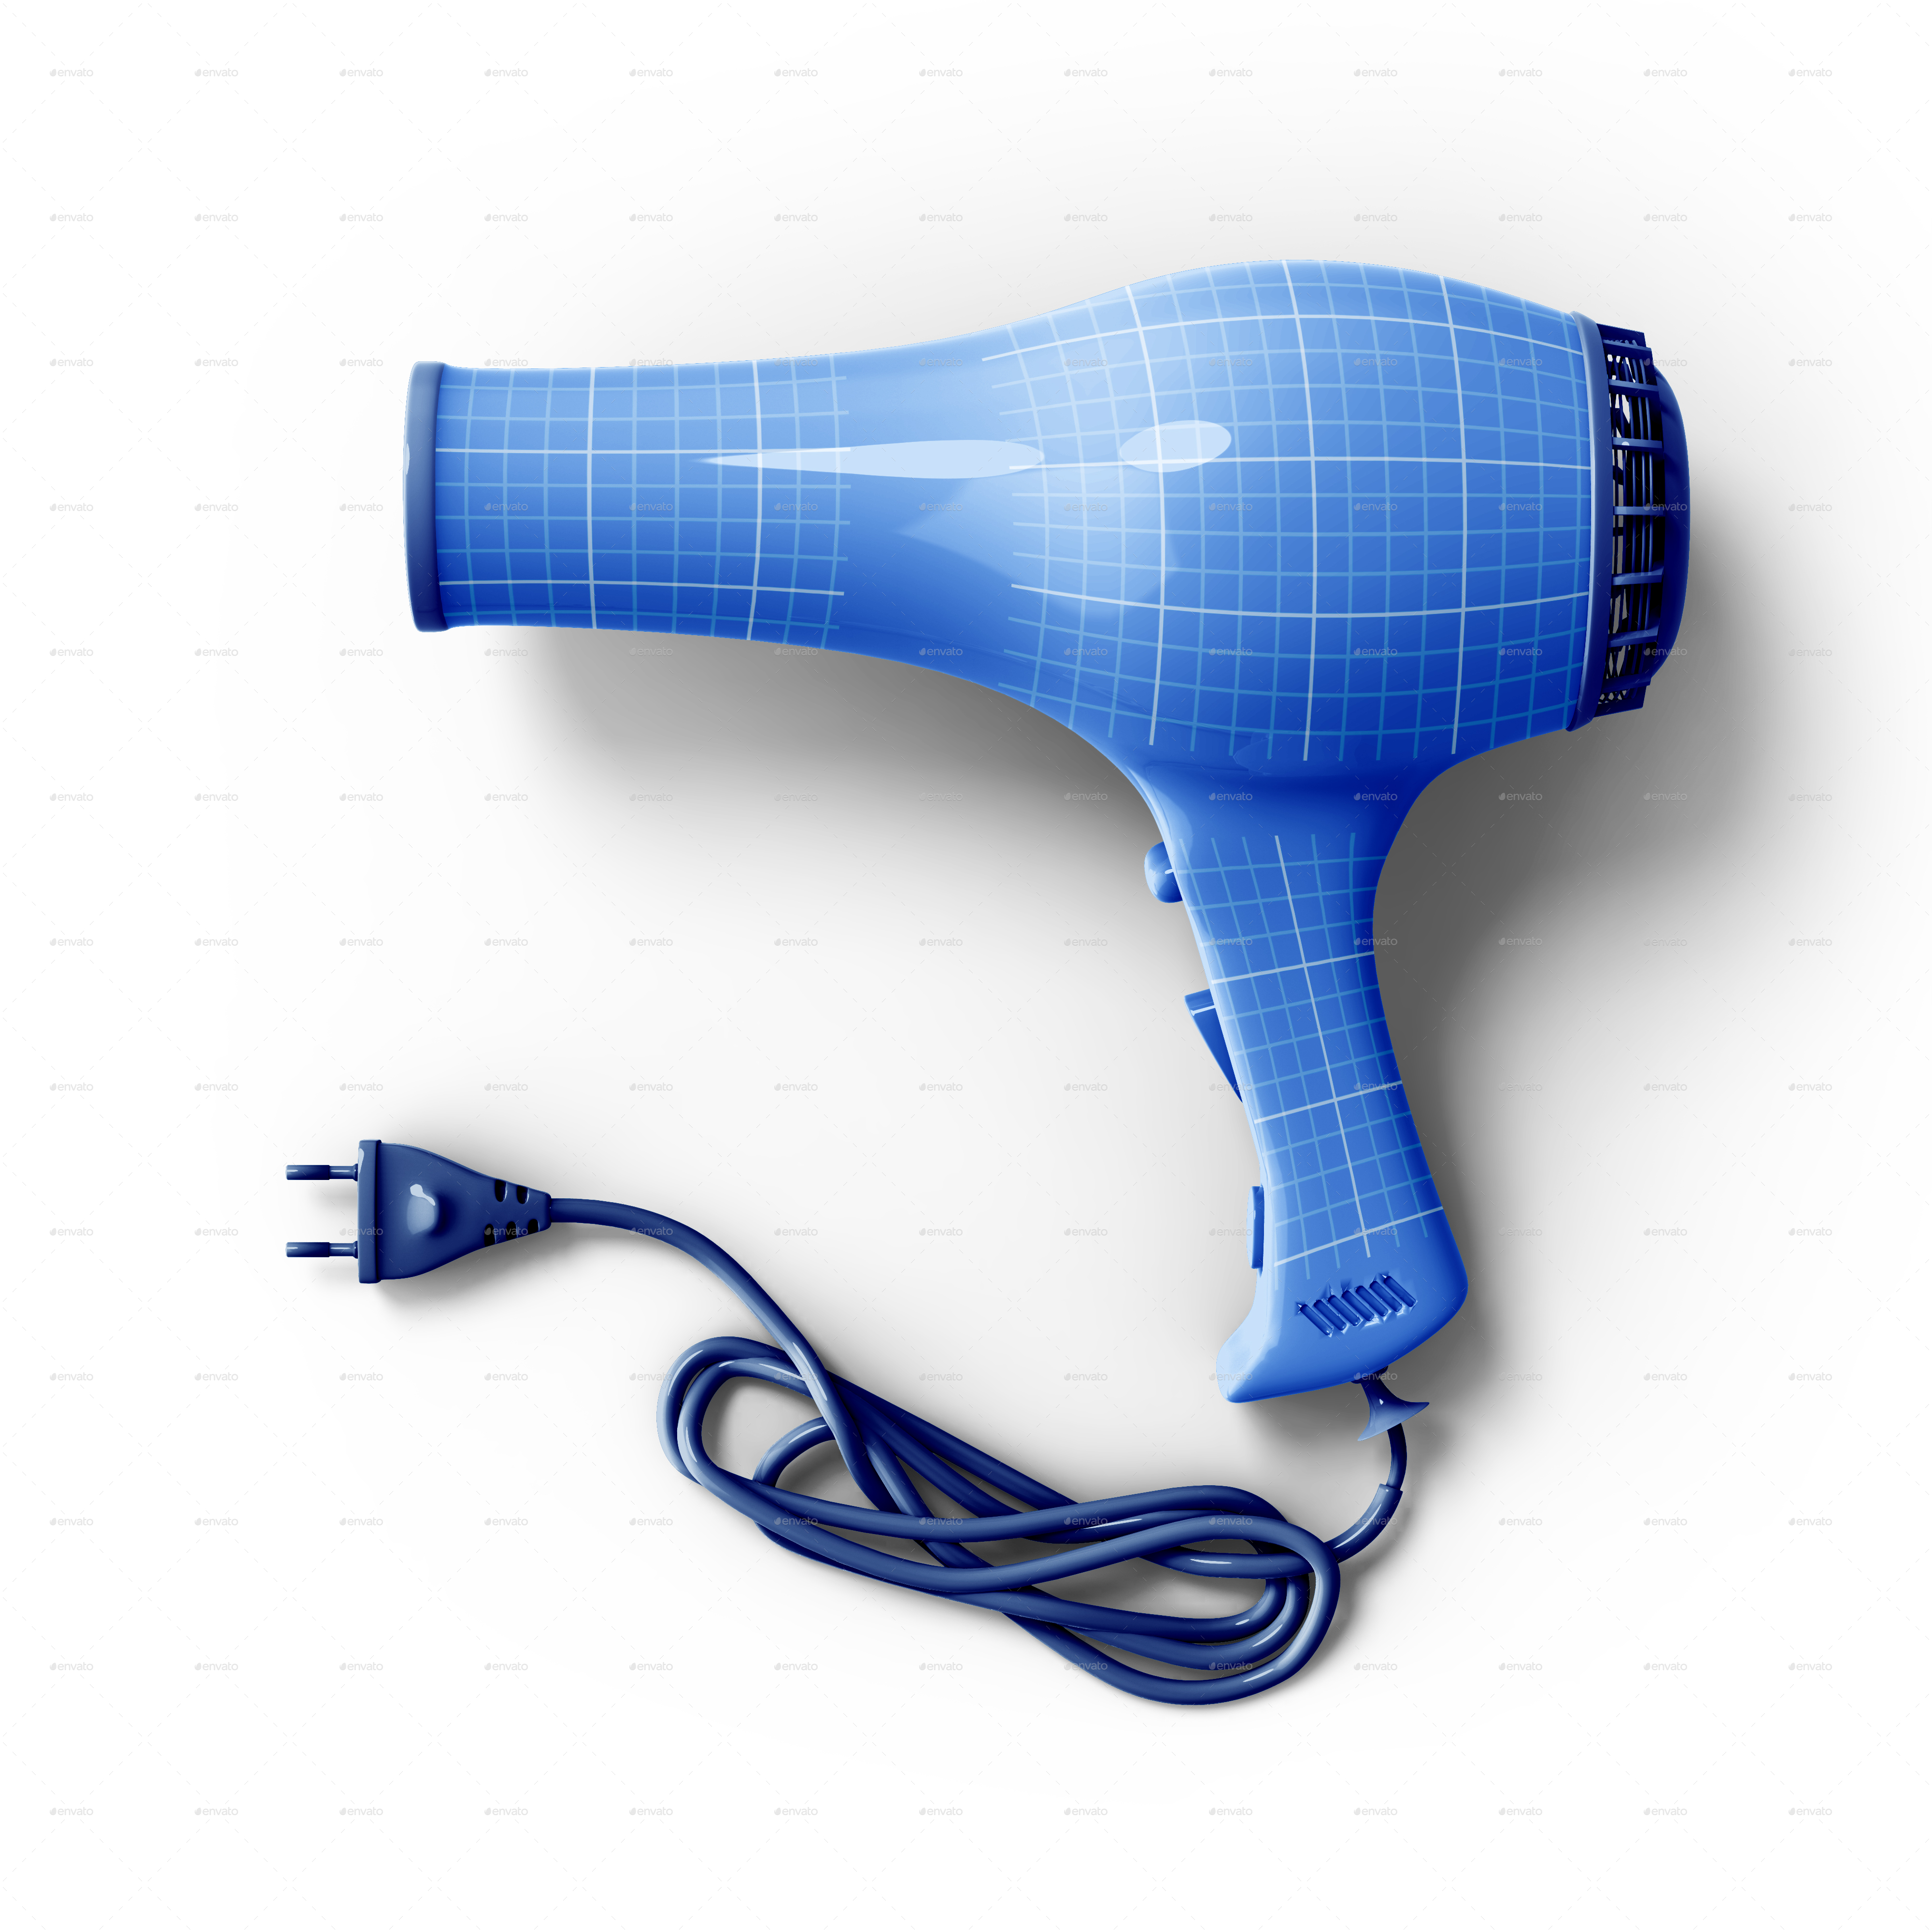 Hair Dryer Mockup by graphicdesigno | GraphicRiver